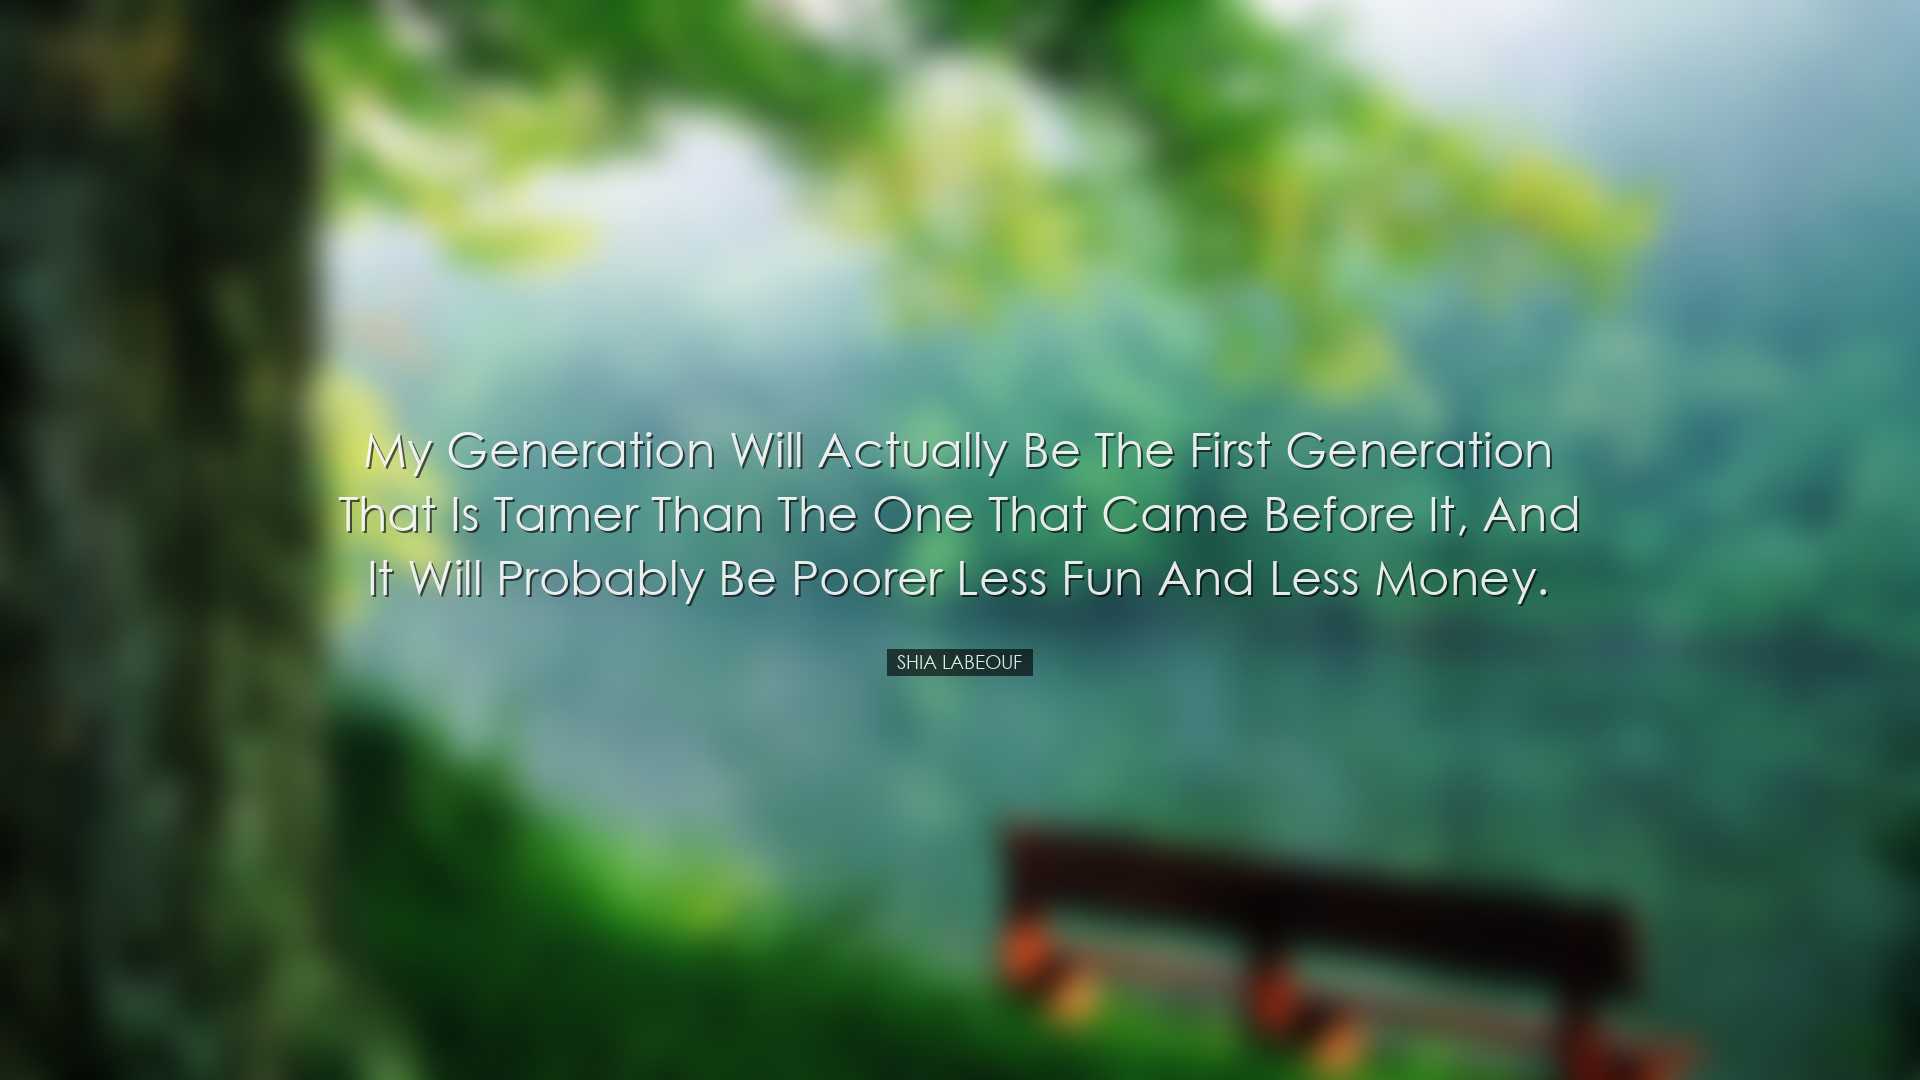 My generation will actually be the first generation that is tamer